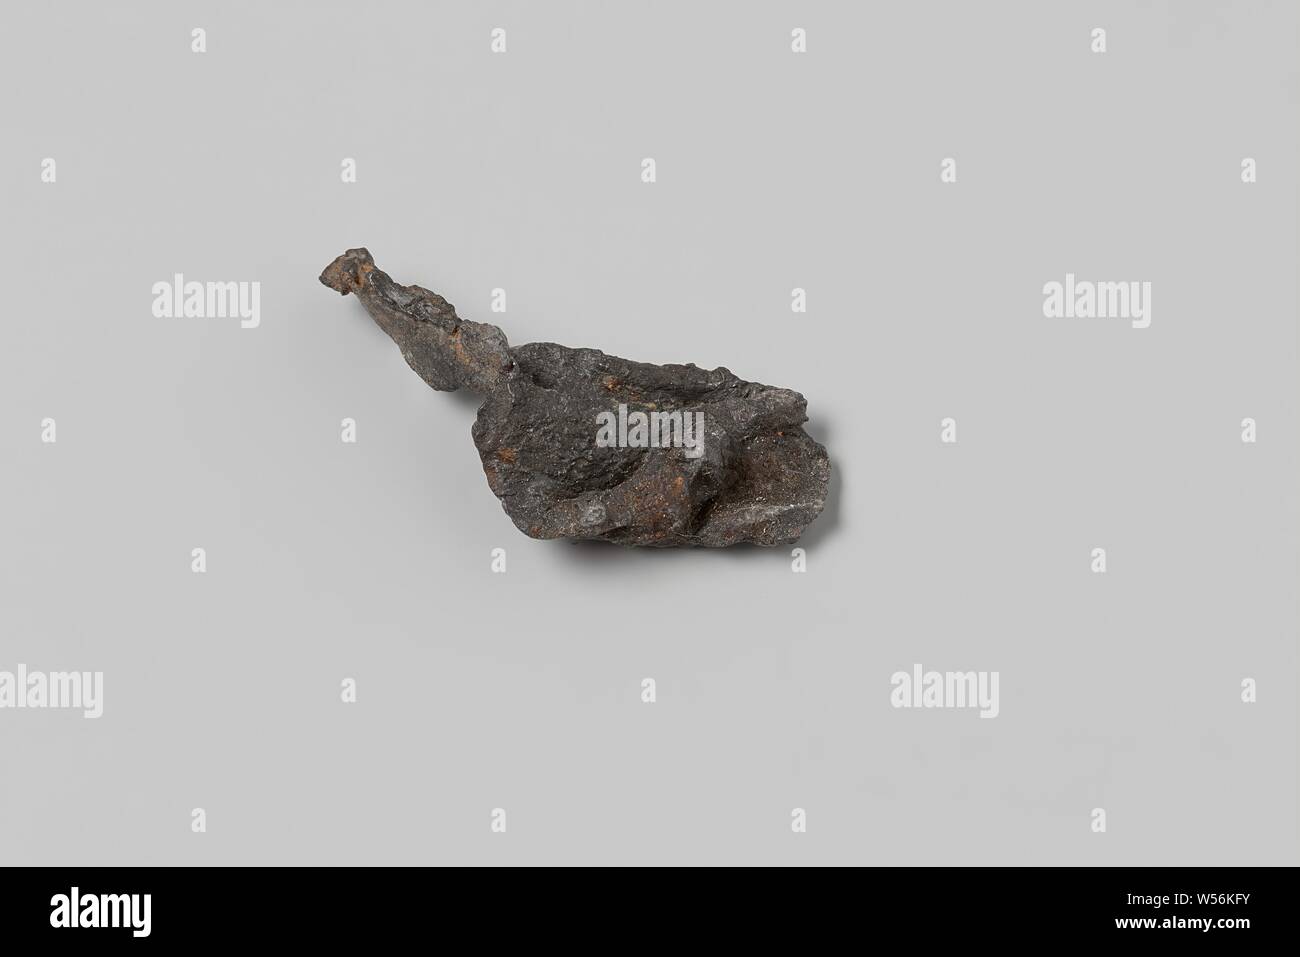 wreck of the East Indies ship Hollandia, Parts of artifacts, eroded fragments: materials, lead, Annet, Dutch East India Company, Hollandia (ship), anonymous, Netherlands, 1700 - in or before 13-Aug-1743, h 3.8 cm × w 5.3 cm × d 1.7 cm Stock Photo